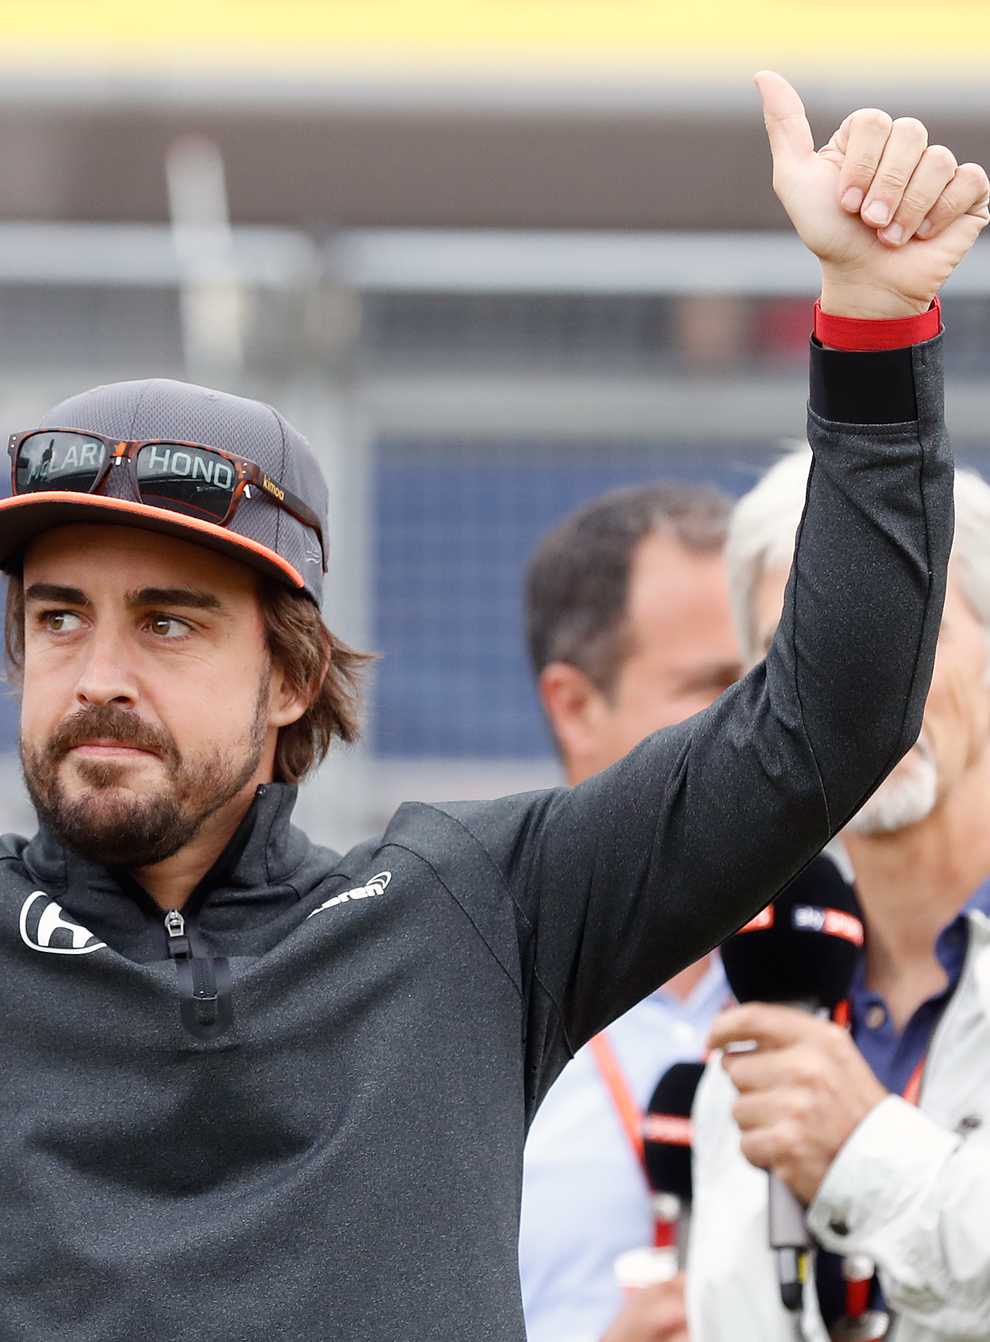 Fernando Alonso will return to the grid in 2021